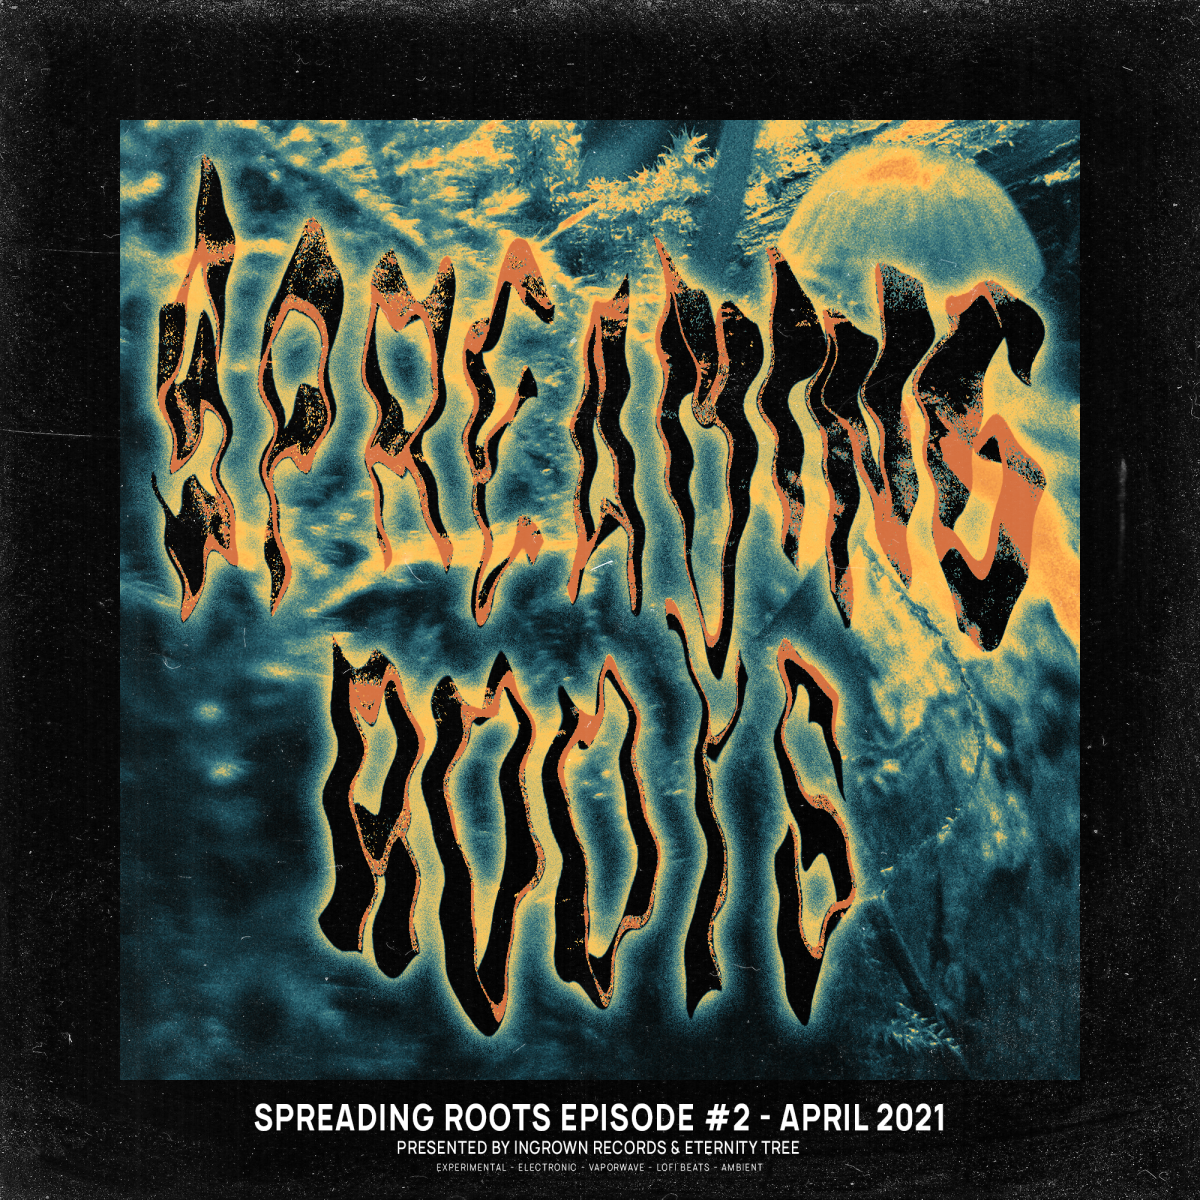 Spreading Roots Episode #2